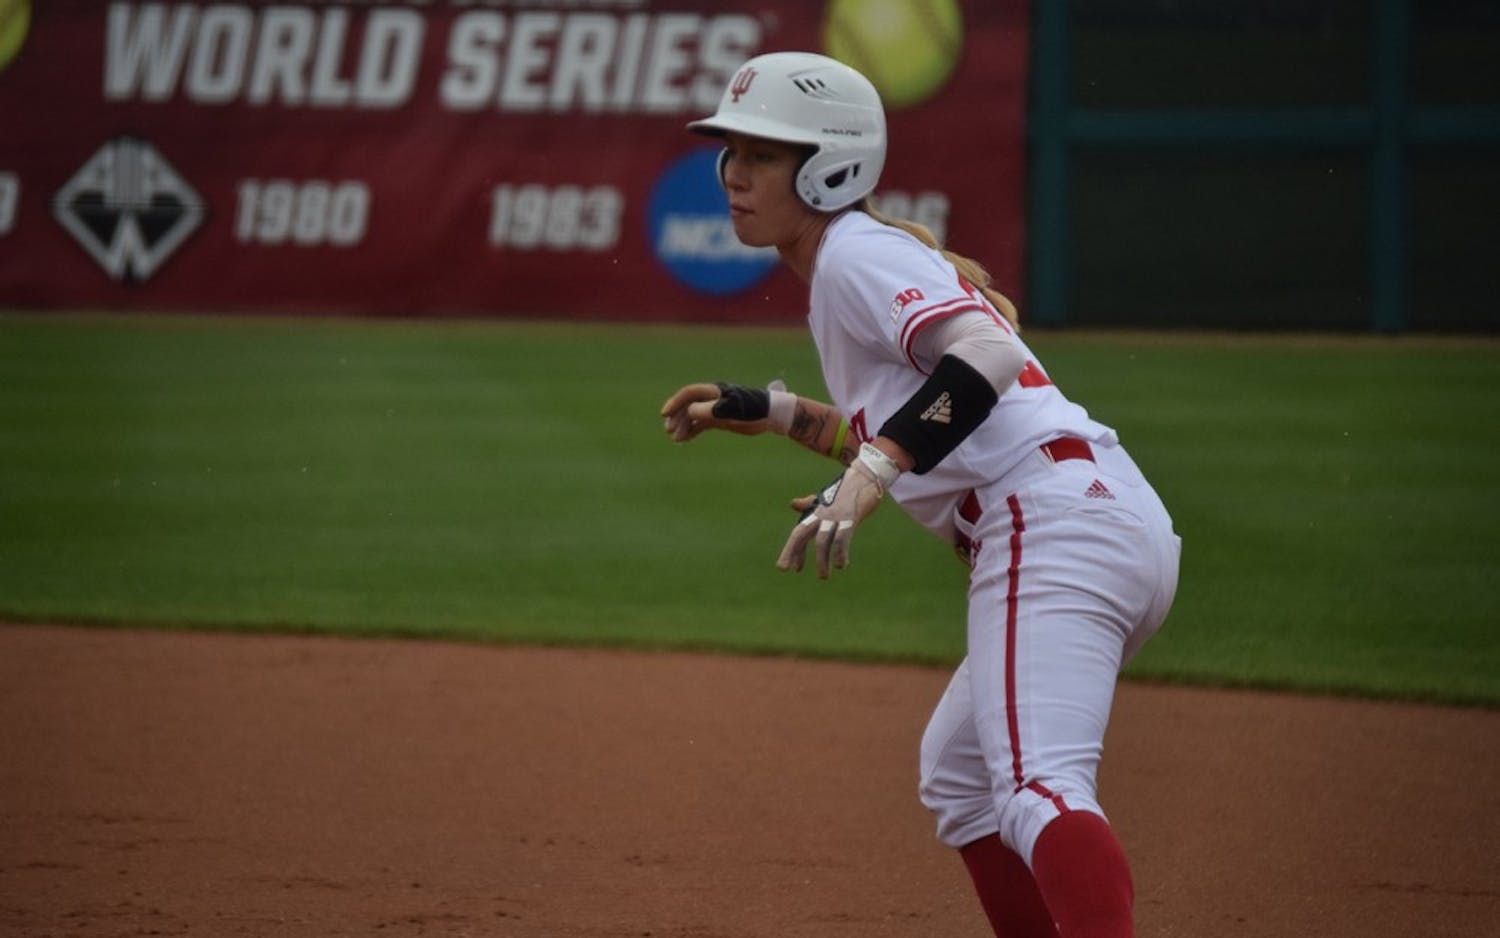 Junior shortstop Rachel O'Malley takes a lead off first base after drawing a&nbsp;walk. The Hoosiers defeated the Terrapins in all three games in Bloomington.